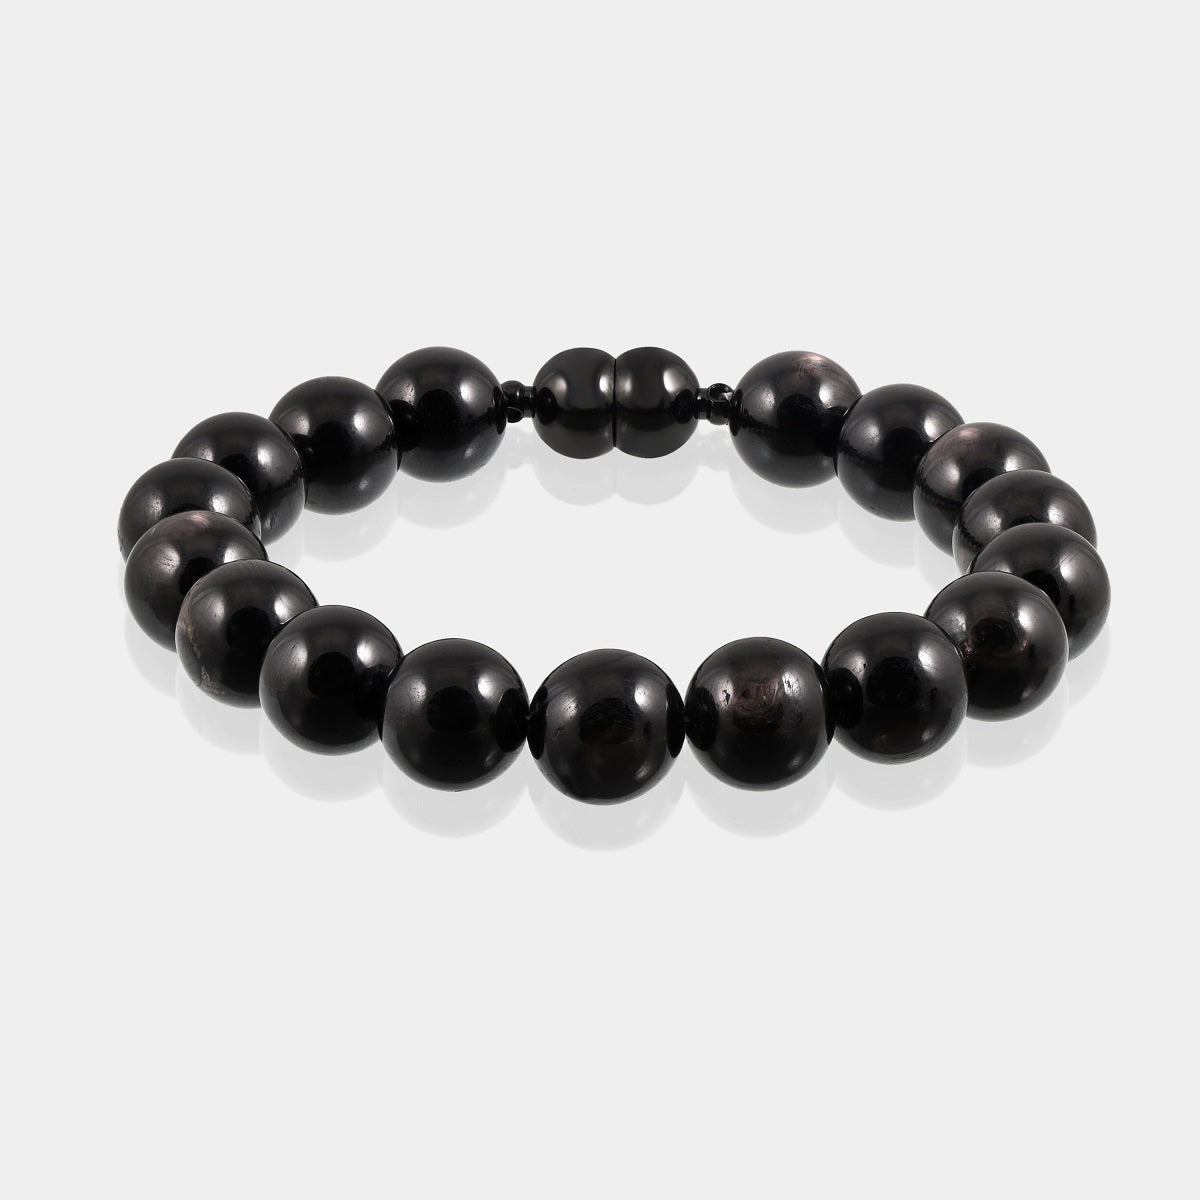 A close-up of a handmade bracelet featuring smooth round hypersthene gemstone beads, showcasing their captivating black color.